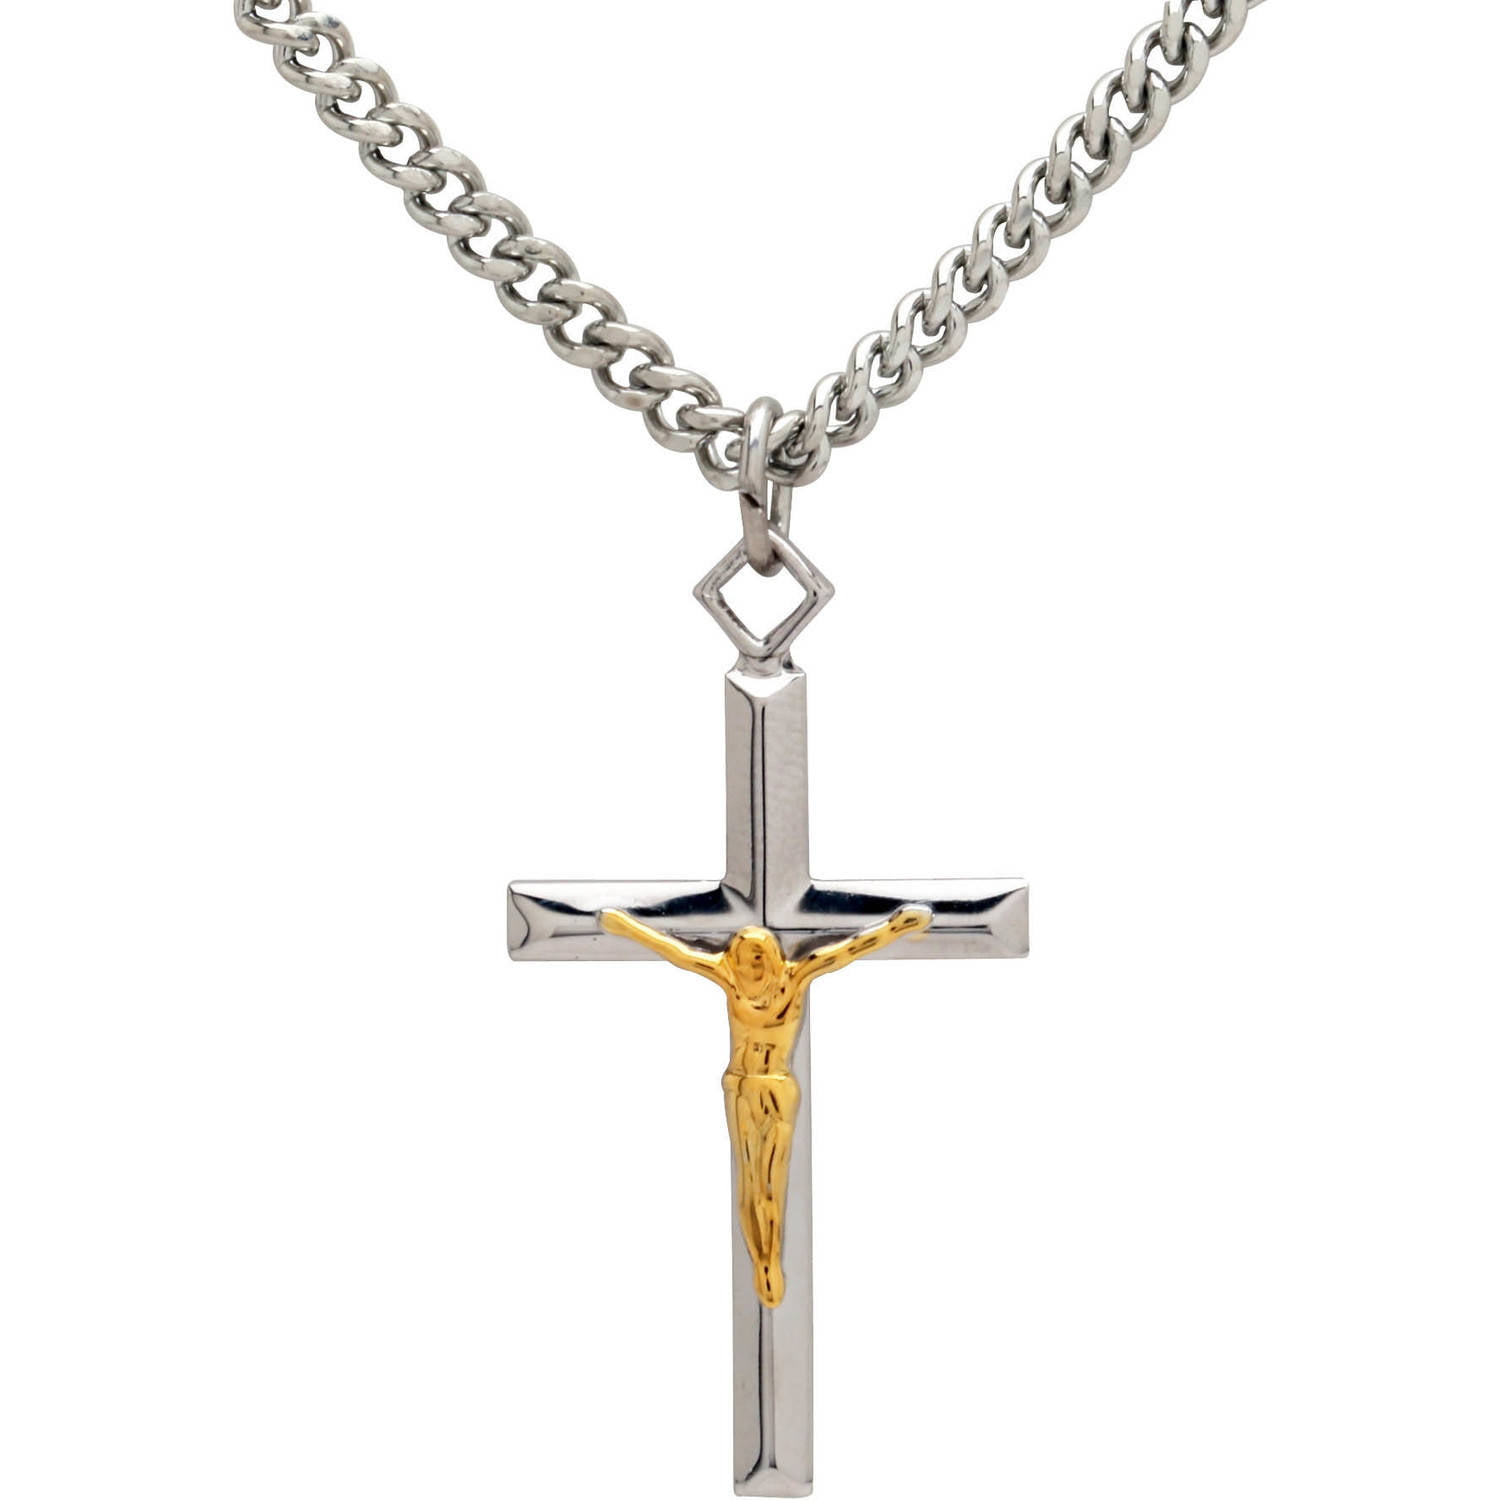 1.22 in x 0.67 in Sterling Silver & 18k Gold Plated Cross Pendant 